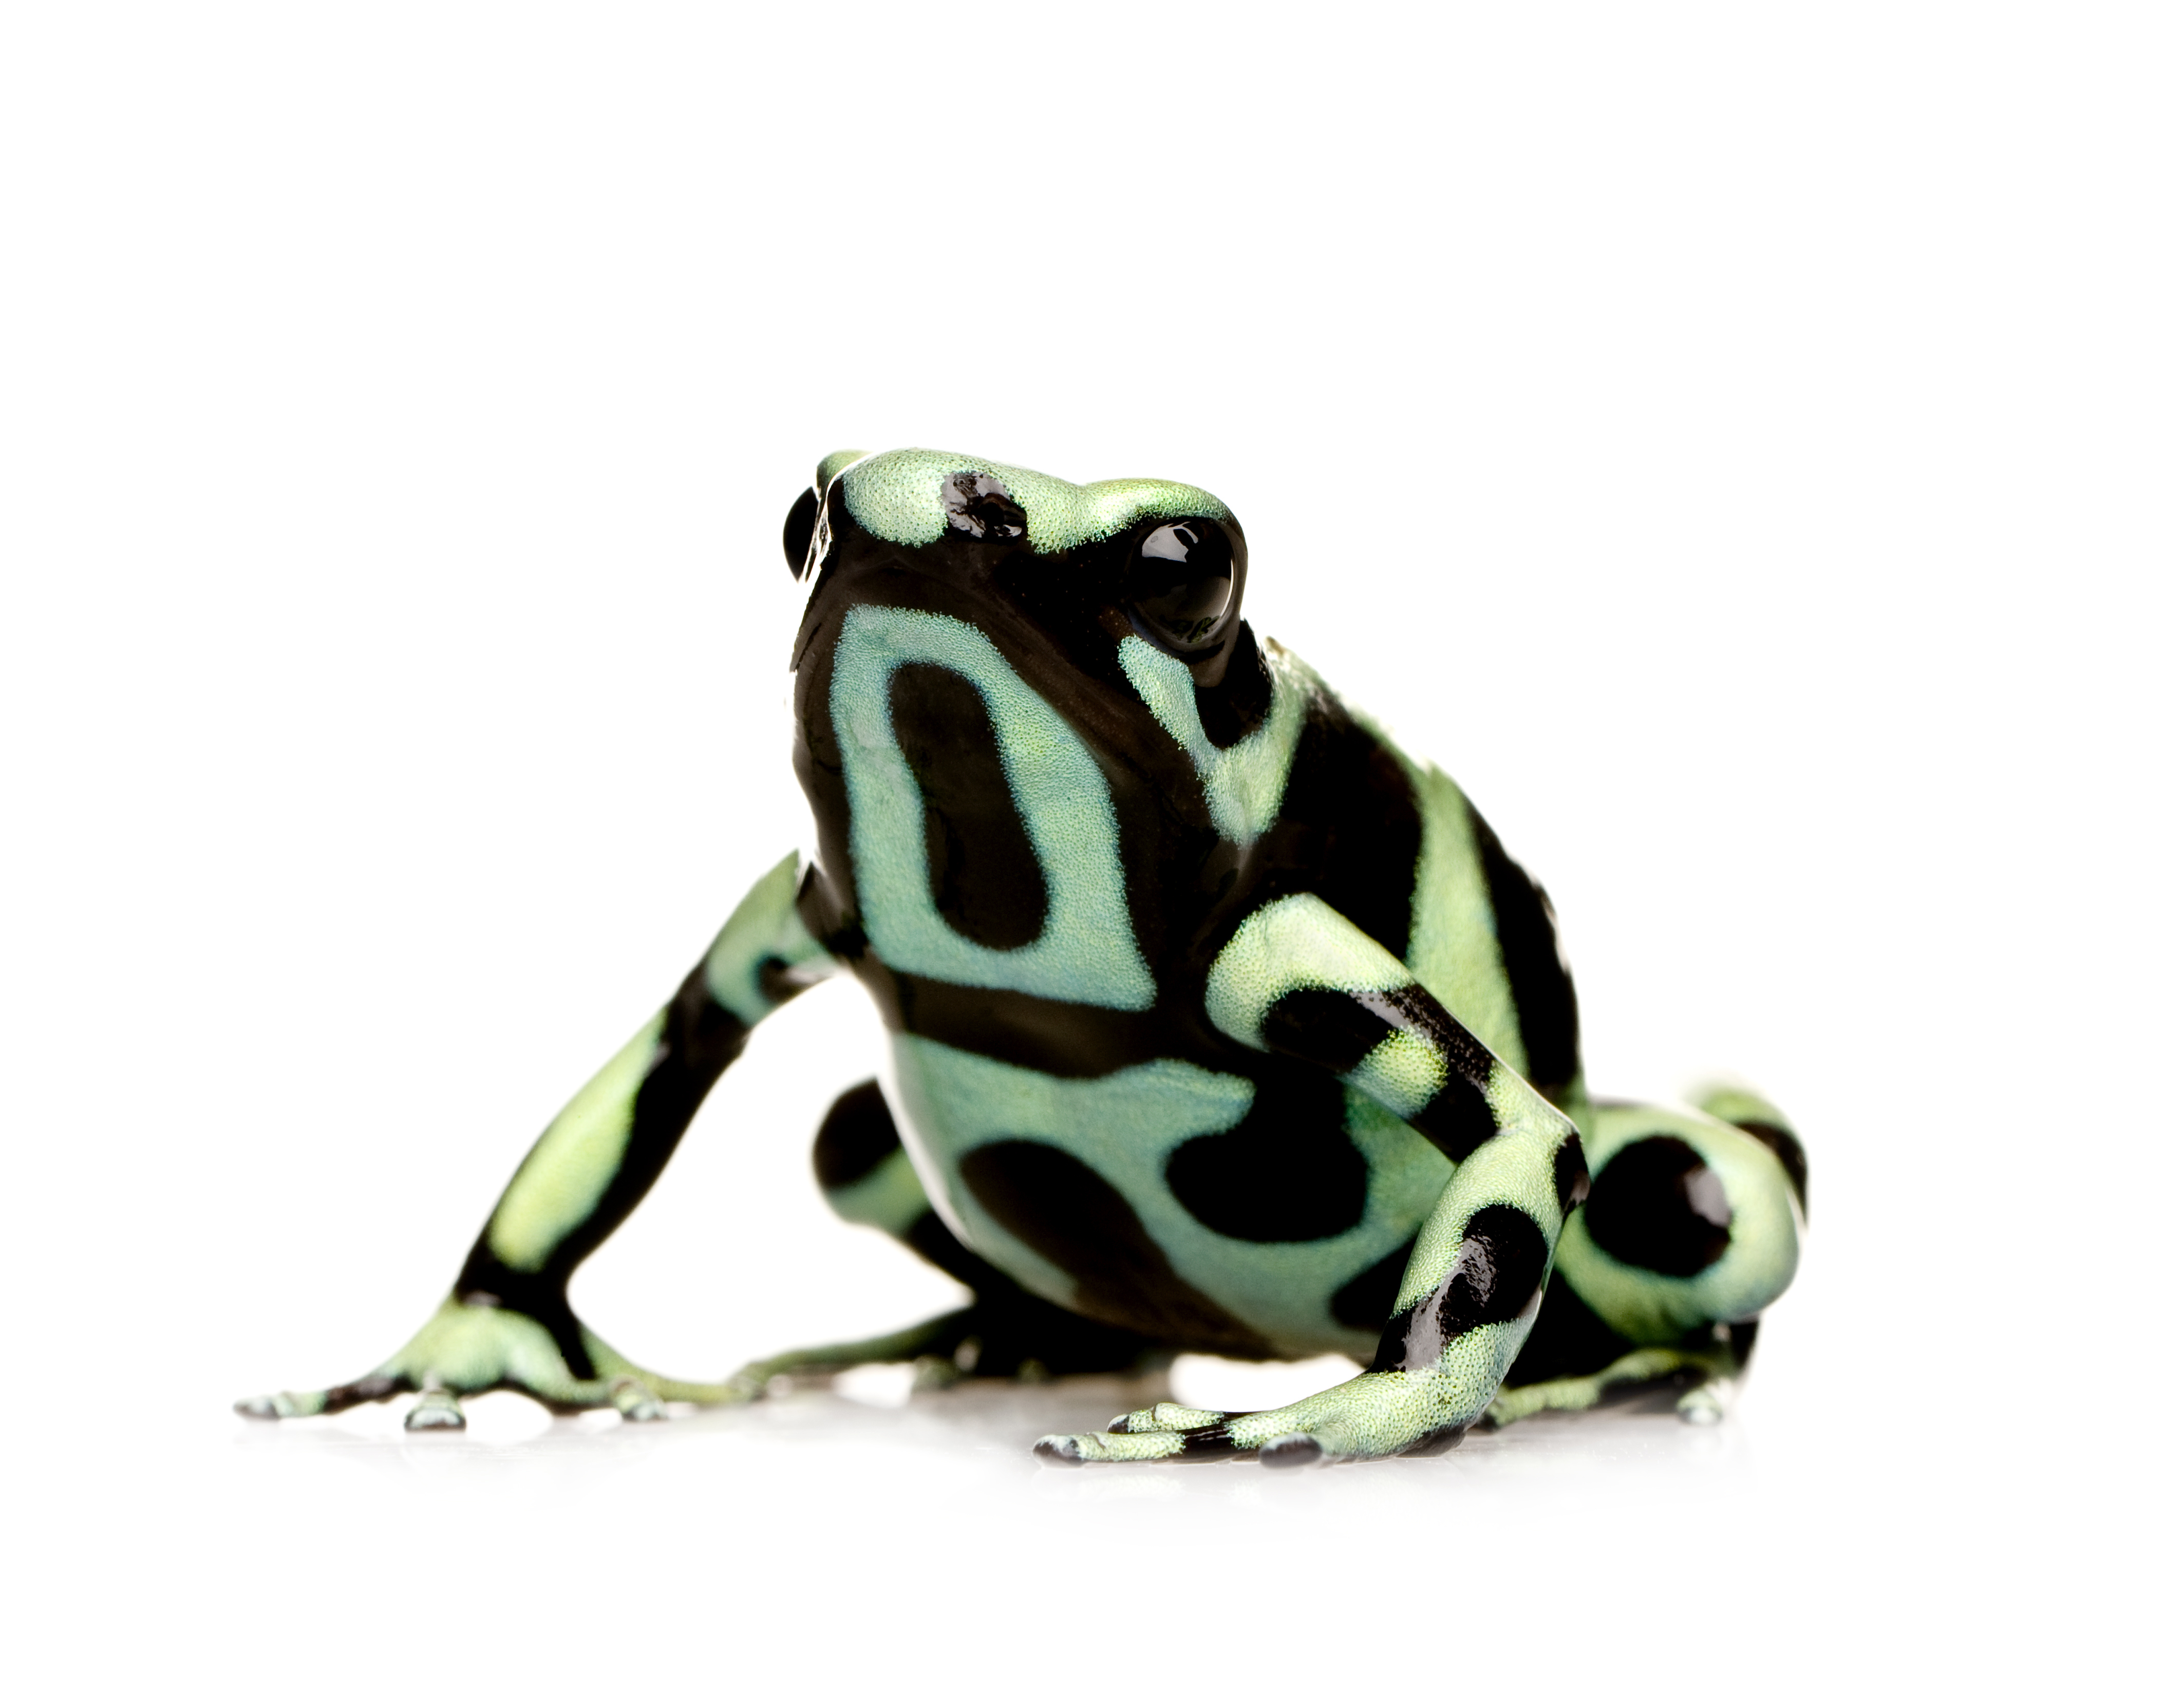 Green and Black Poison Dart Frog (Dendrobates auratus) in front of a white background.